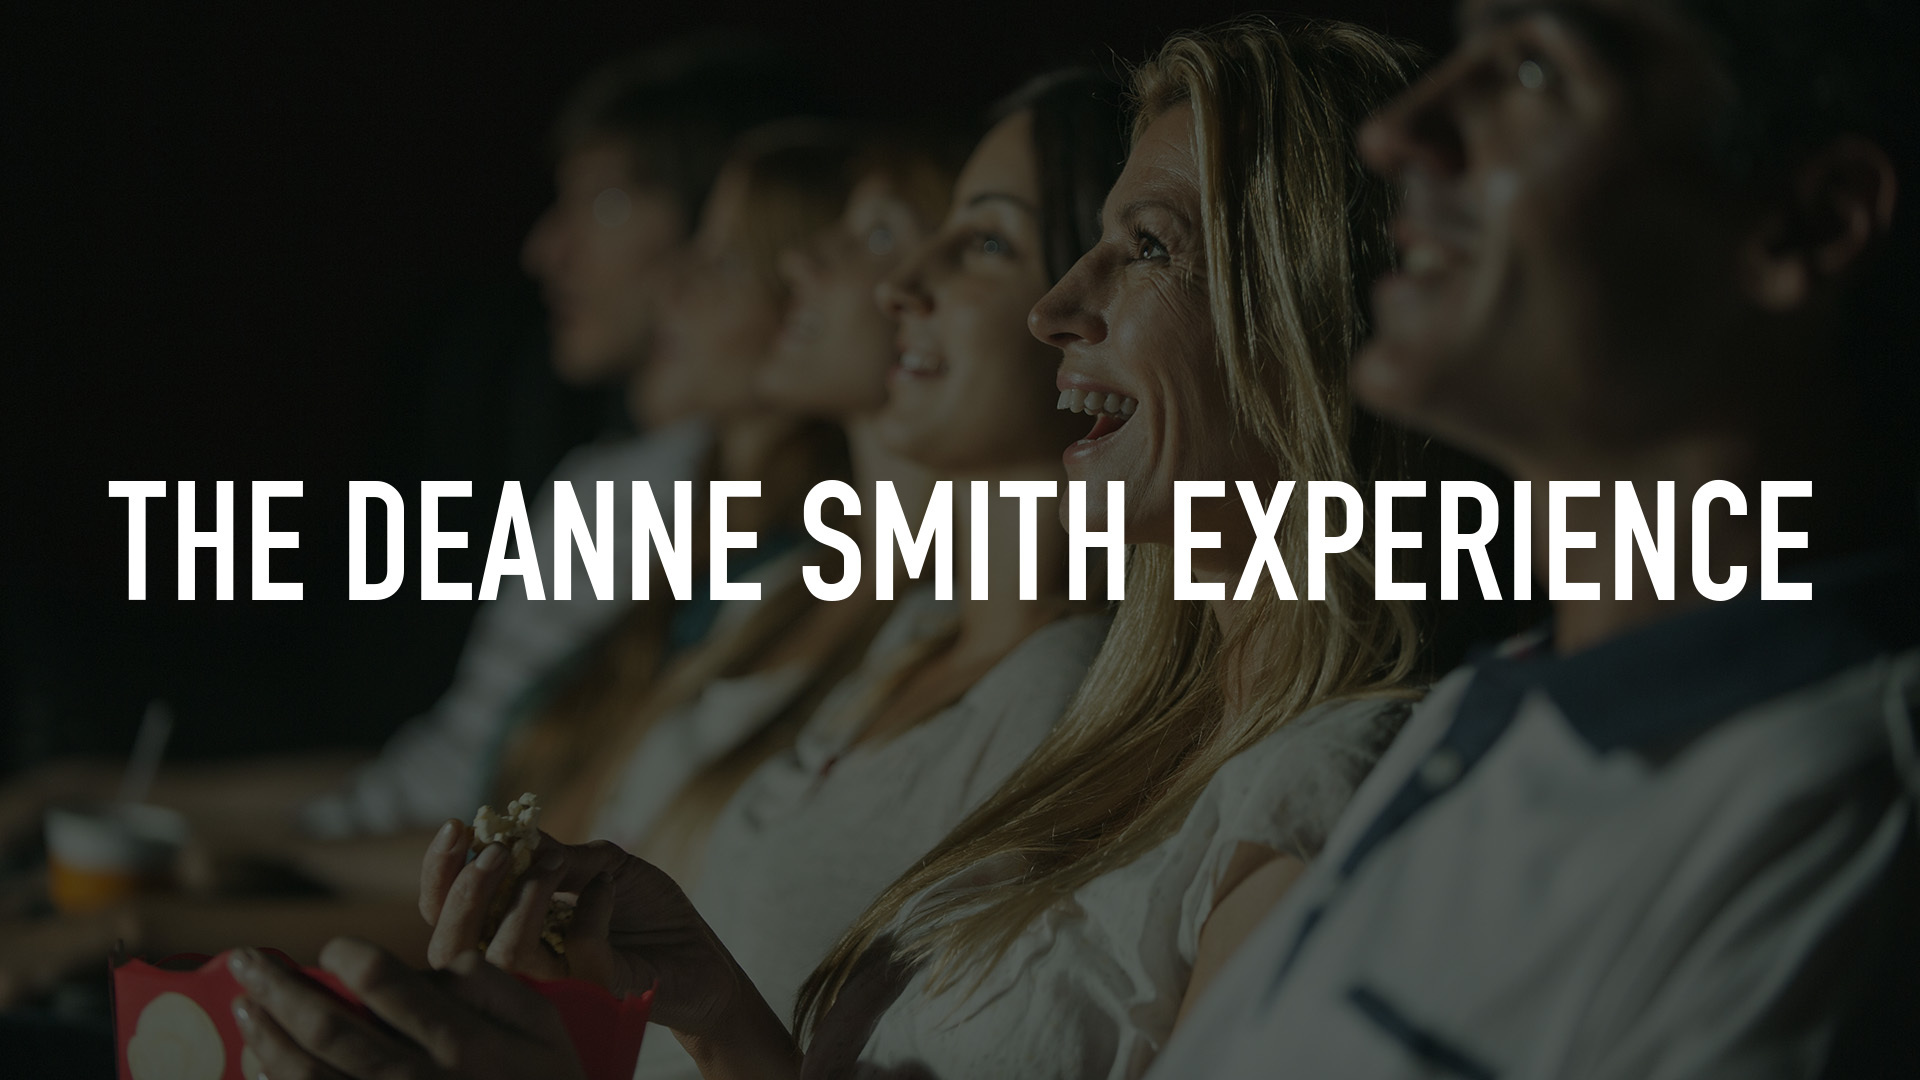 The DeAnne Smith Experience